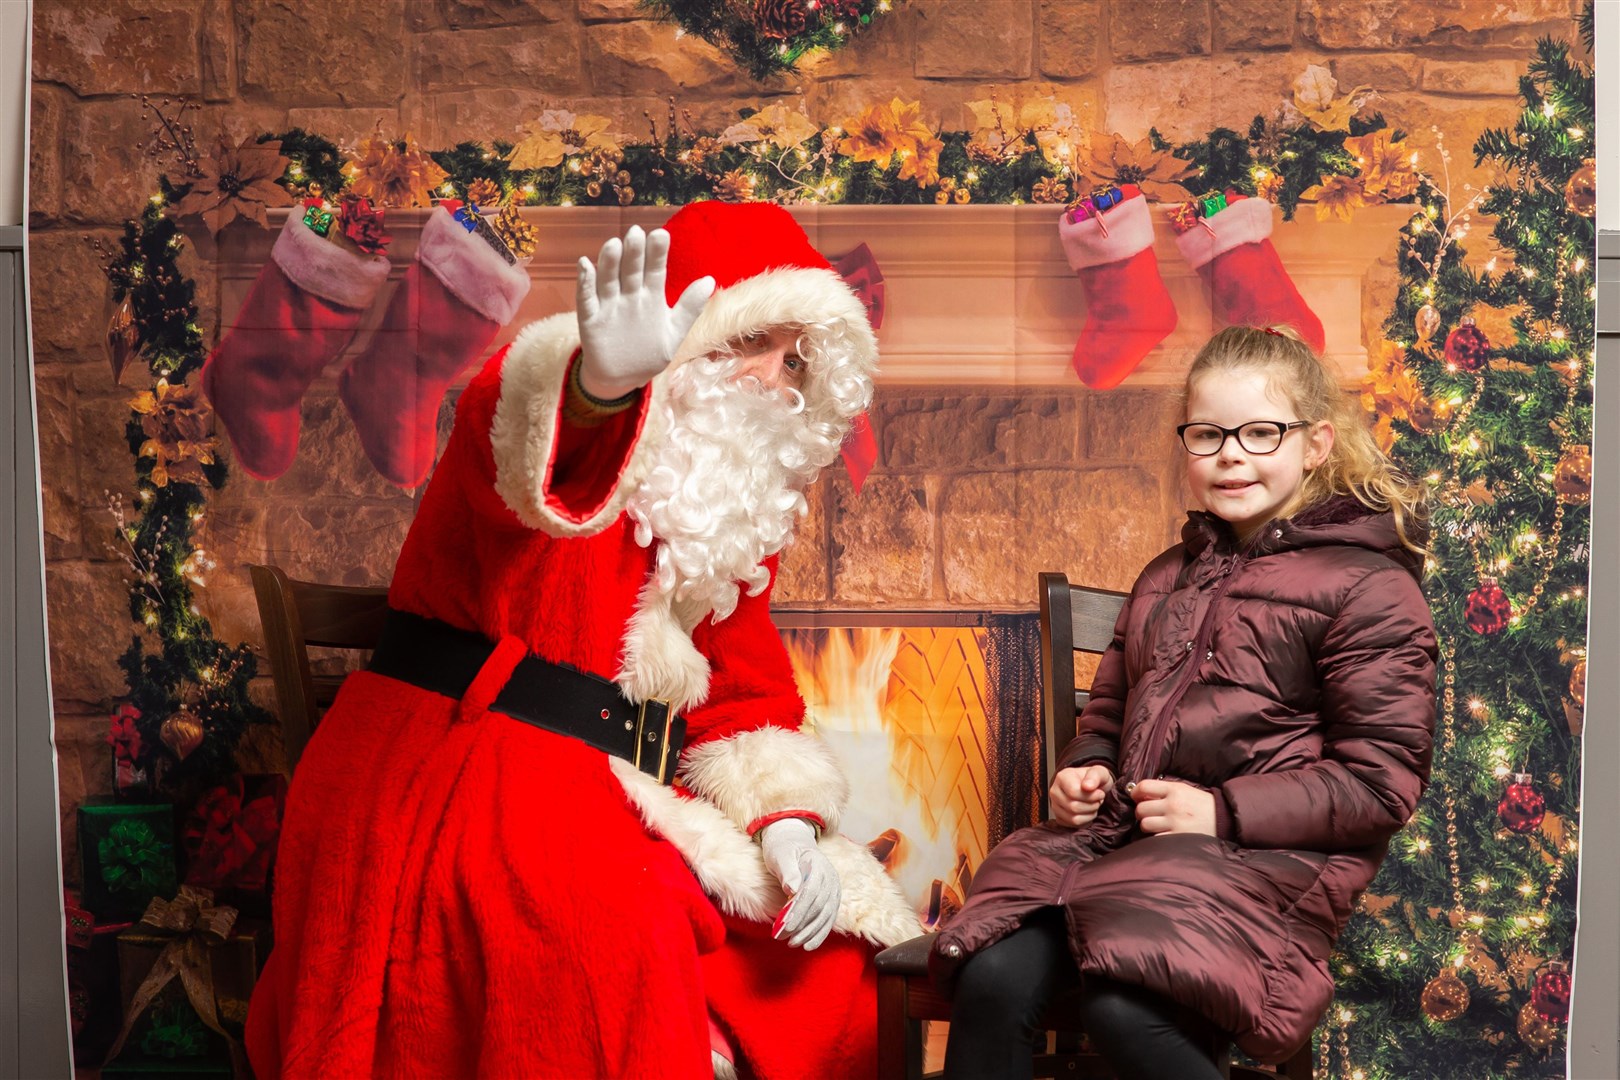 The youngsters got to meet Santa. Picture: Mike Leslie